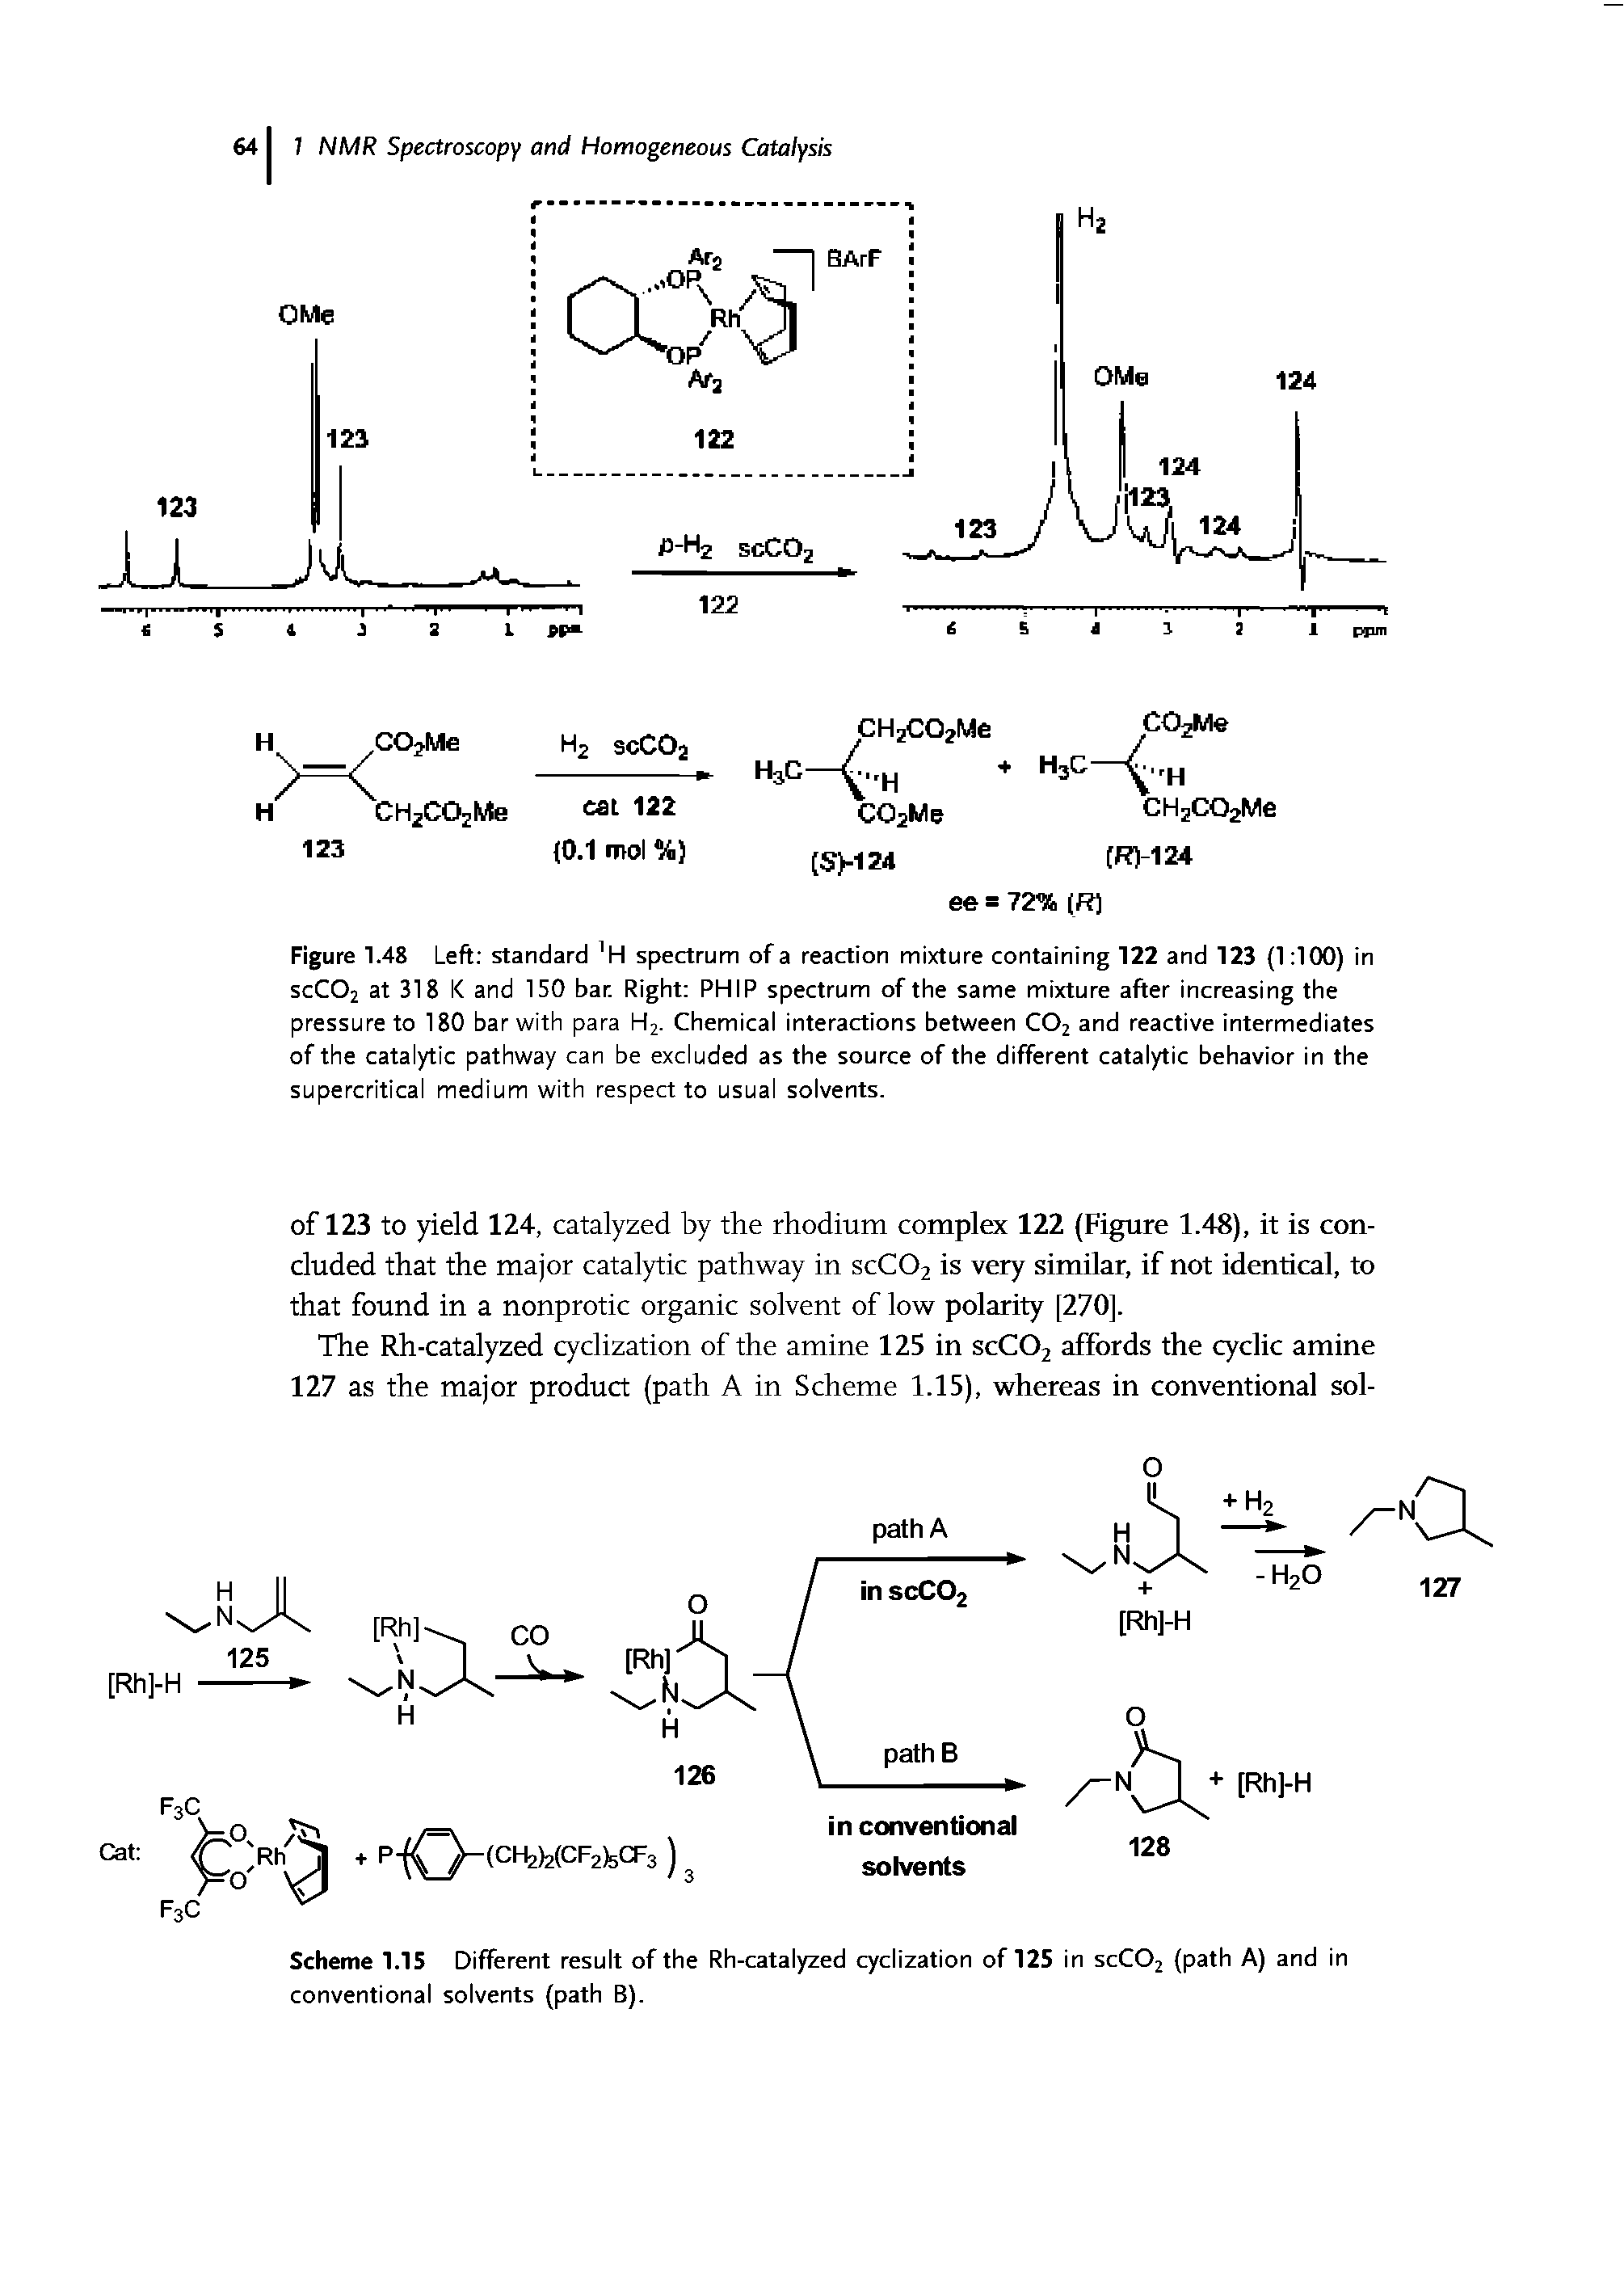 Figure 1.48 Left standard H spectrum of a reaction mixture containing 122 and 123 (1 100) in SCCO2 at 318 l< and 150 bar. Right PHIP spectrum of the same mixture after increasing the pressure to 180 bar with para H2. Chemical interactions between CO2 and reactive intermediates of the catalytic pathway can be excluded as the source of the different catalytic behavior in the supercritical medium with respect to usual solvents.